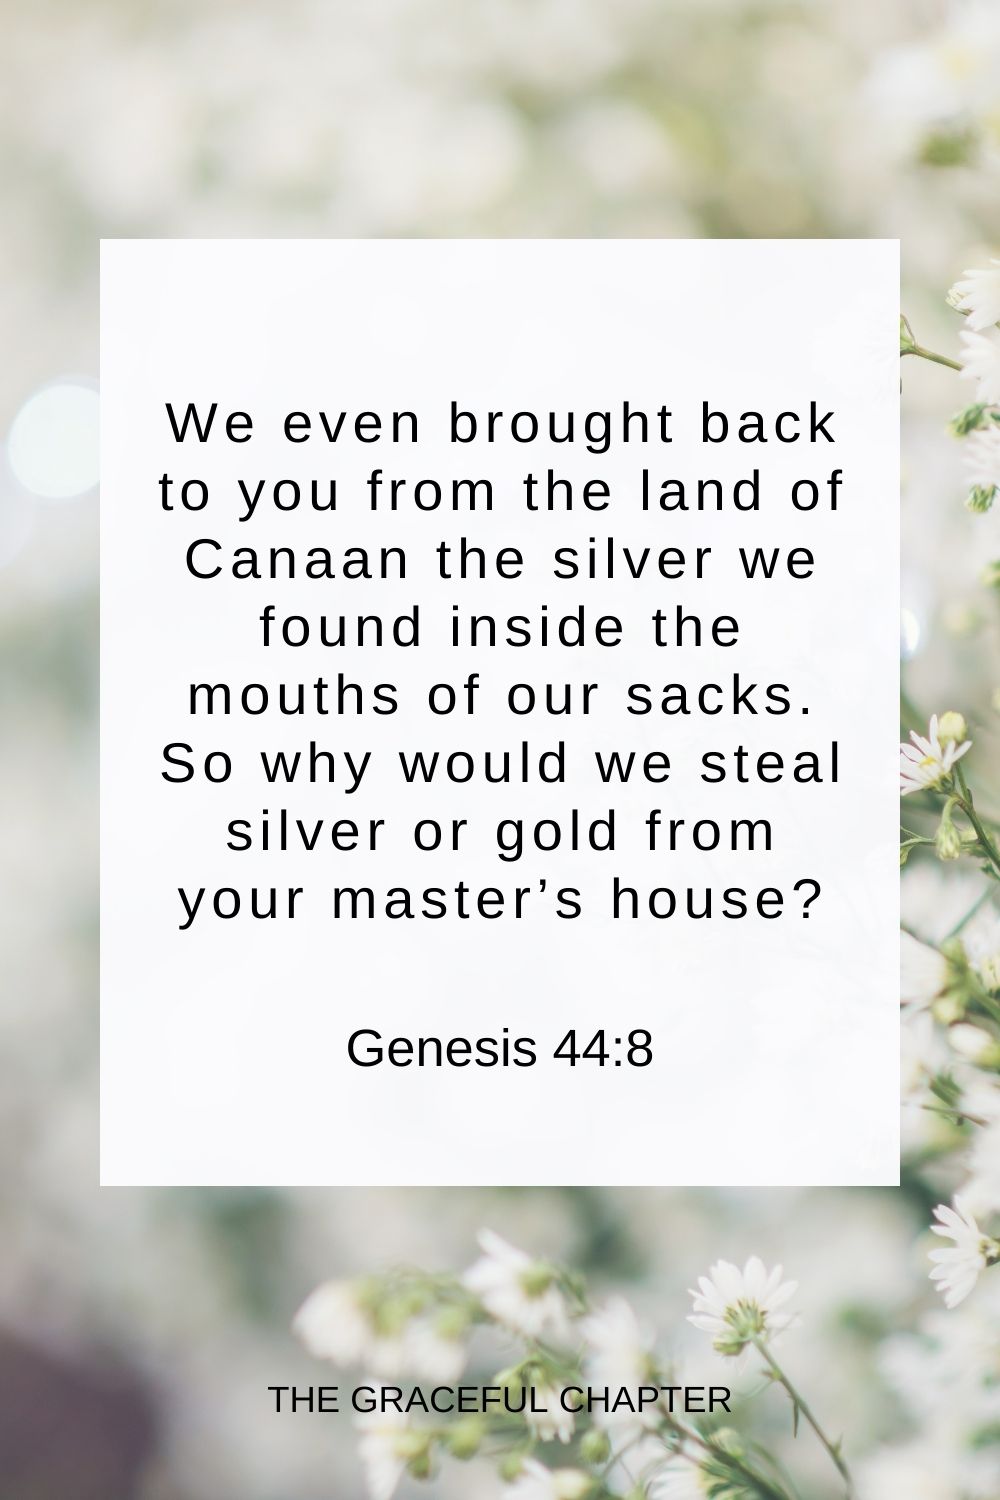 We even brought back to you from the land of Canaan the silver we found inside the mouths of our sacks. So why would we steal silver or gold from your master’s house? Genesis 44:8